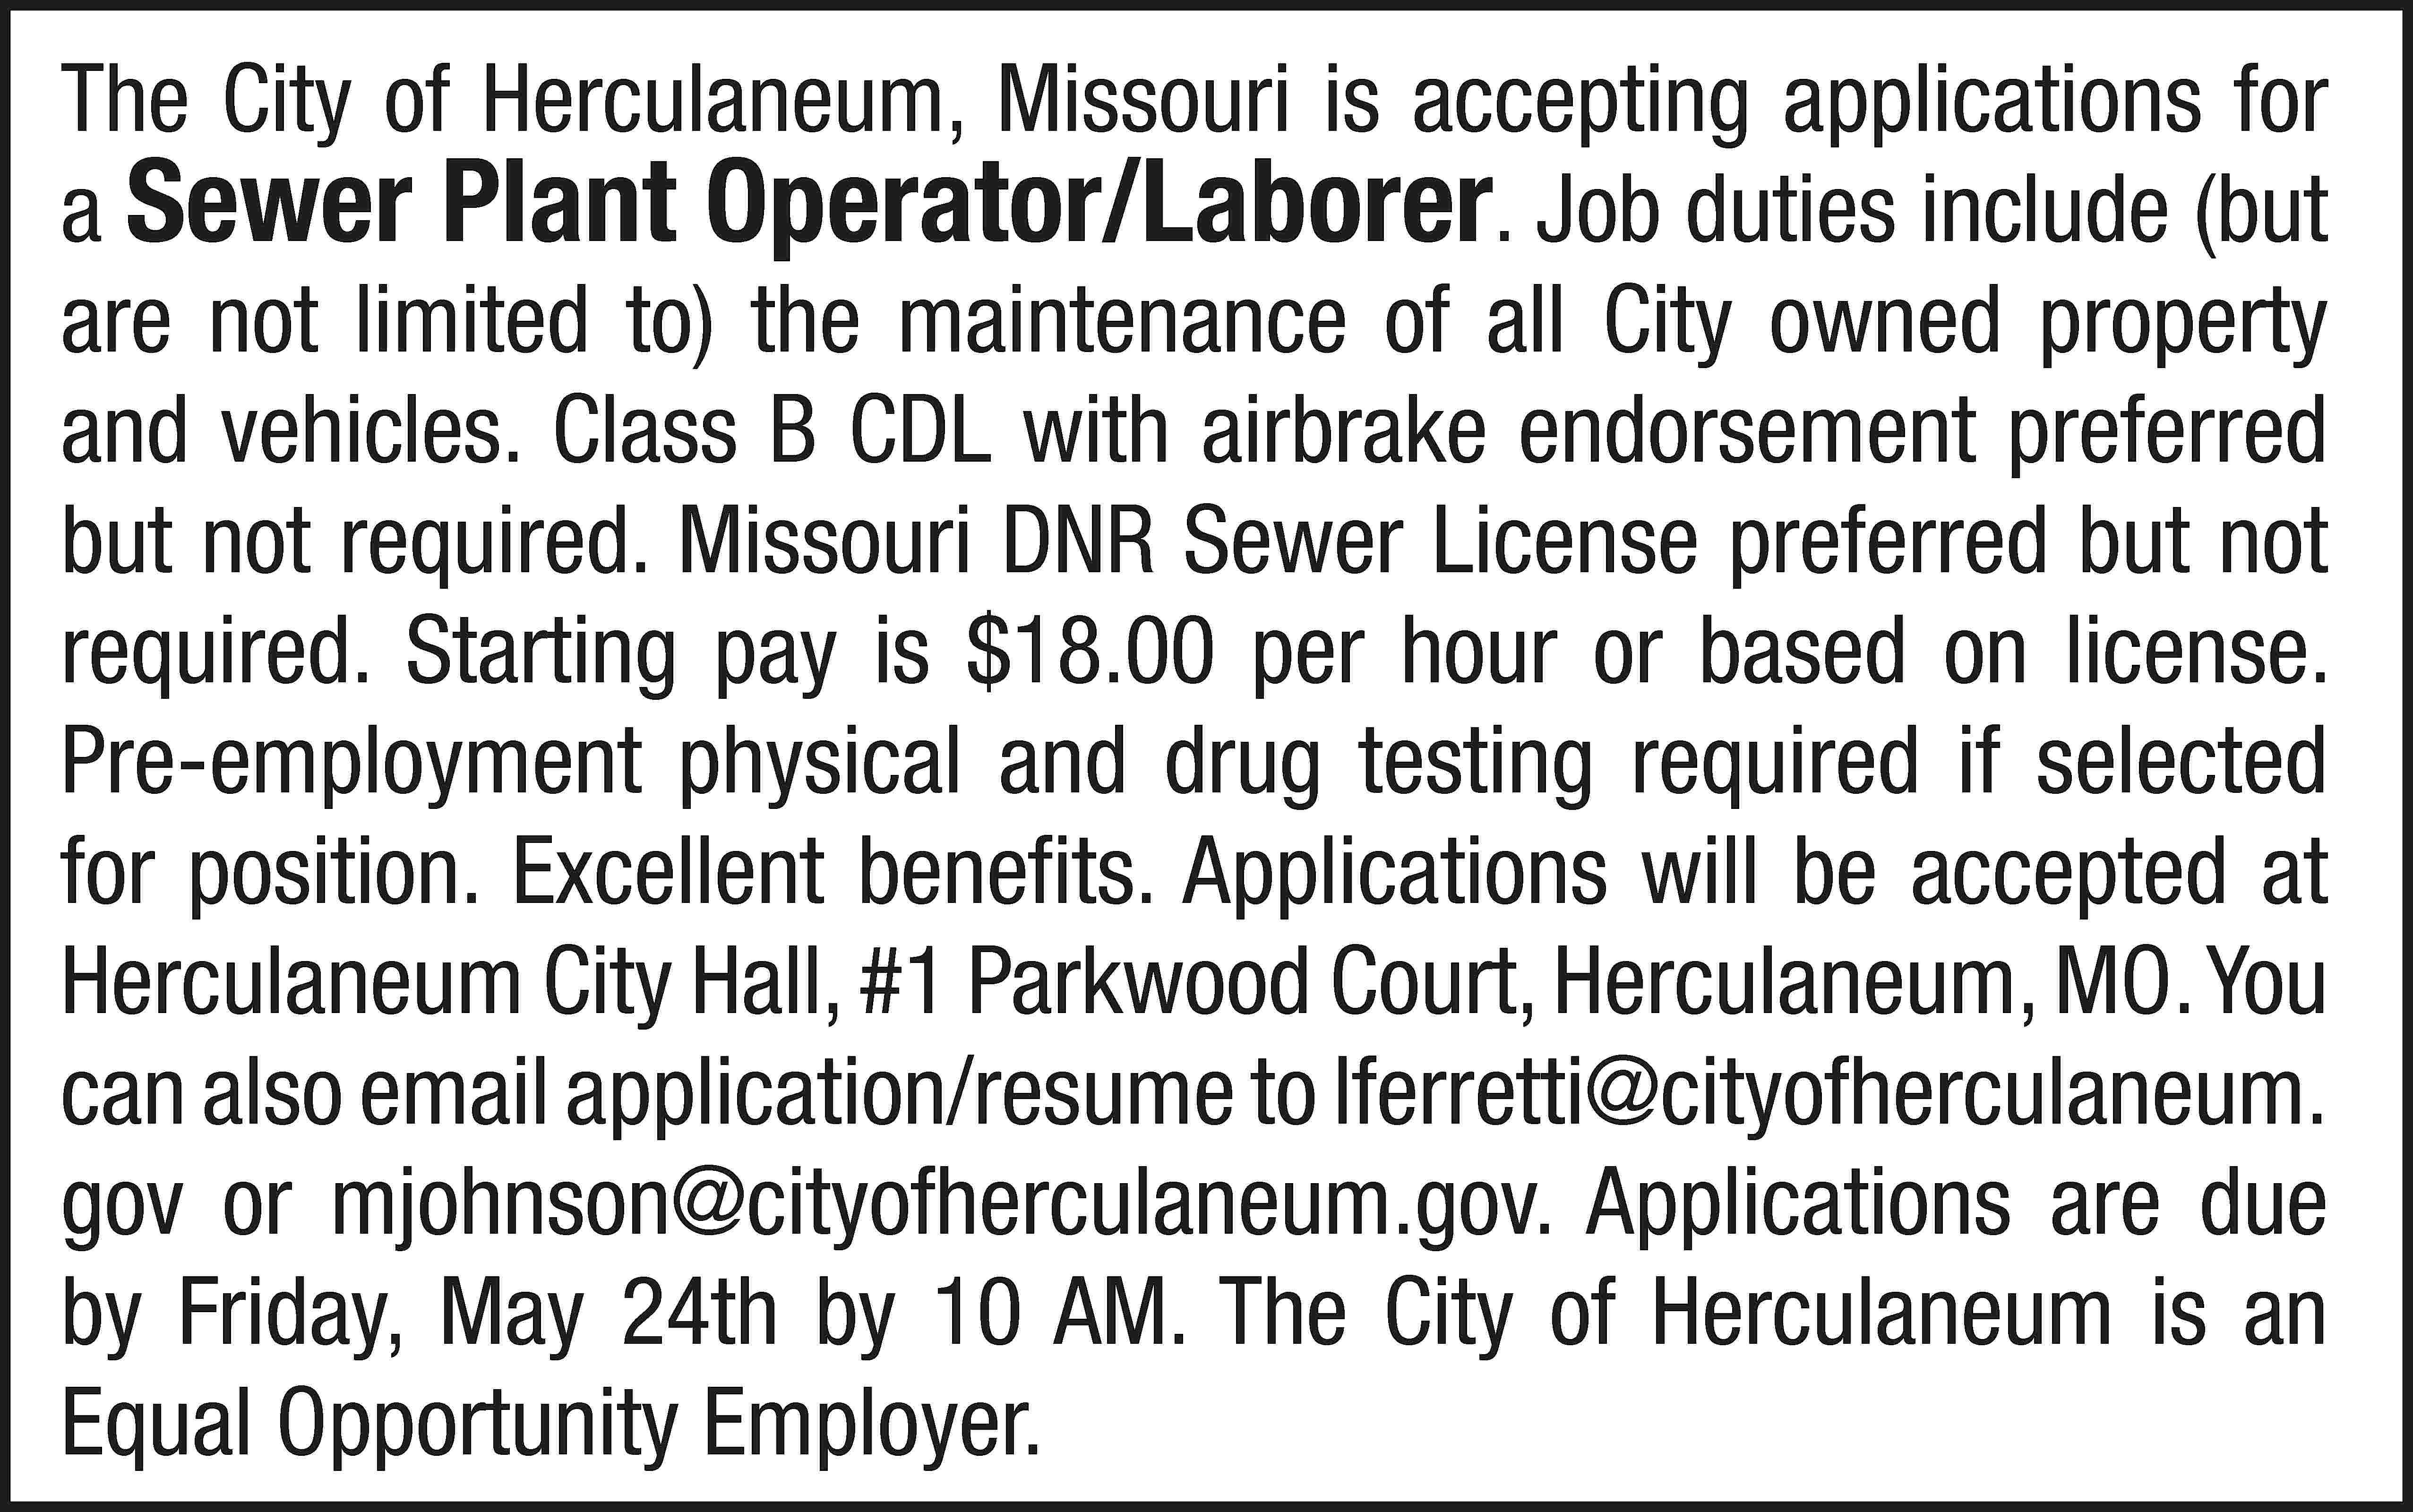 The City of Herculaneum, Missouri  The City of Herculaneum, Missouri is accepting applications for a Sewer Plant Operator/Laborer. Job duties include (but are not limited to) the maintenance of all City owned property and vehicles. Class B CDL with airbrake endorsement preferred but not required. Missouri DNR Sewer License preferred but not required. Starting pay is $18.00 per hour or based on license. Pre-employment physical and drug testing required if selected for position. Excellent benefits. Applications will be accepted at Herculaneum City Hall, #1 Parkwood Court, Herculaneum, MO. You can also email application/resume to lferretti@cityofherculaneum. gov or mjohnson@cityofherculaneum.gov. Applications are due by Friday, May 24th by 10 AM. The City of Herculaneum is an Equal Opportunity Employer.